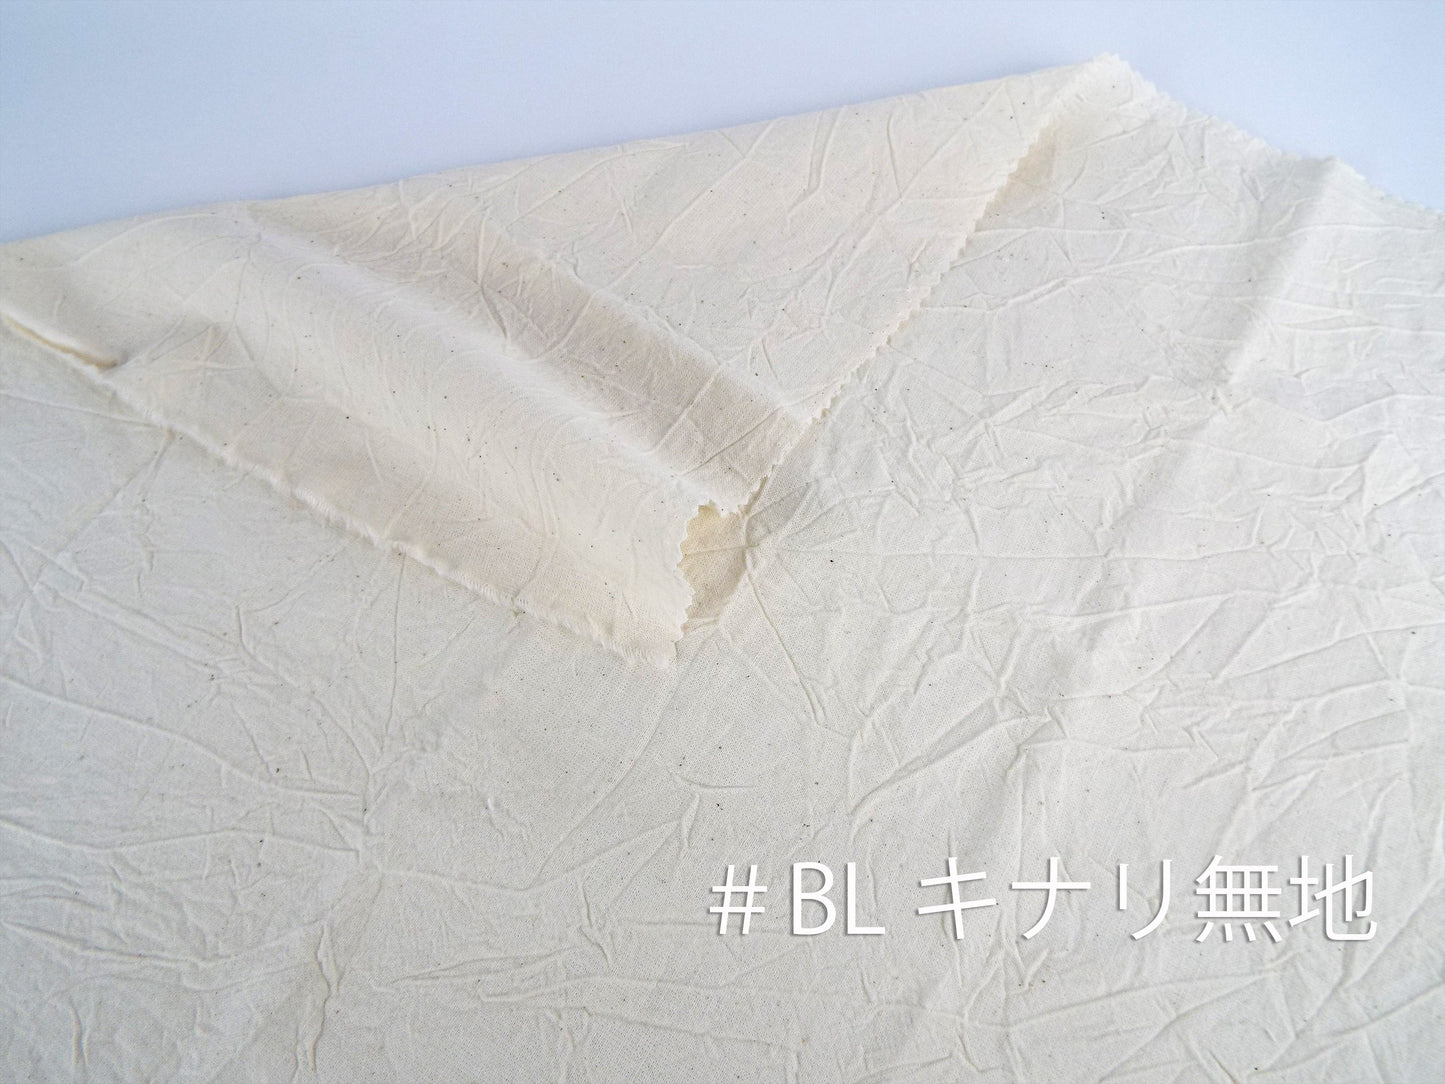 Kameda striped cotton fabric BL plain Kinari plain wrinkle processing Thick fabric goes well with jeans